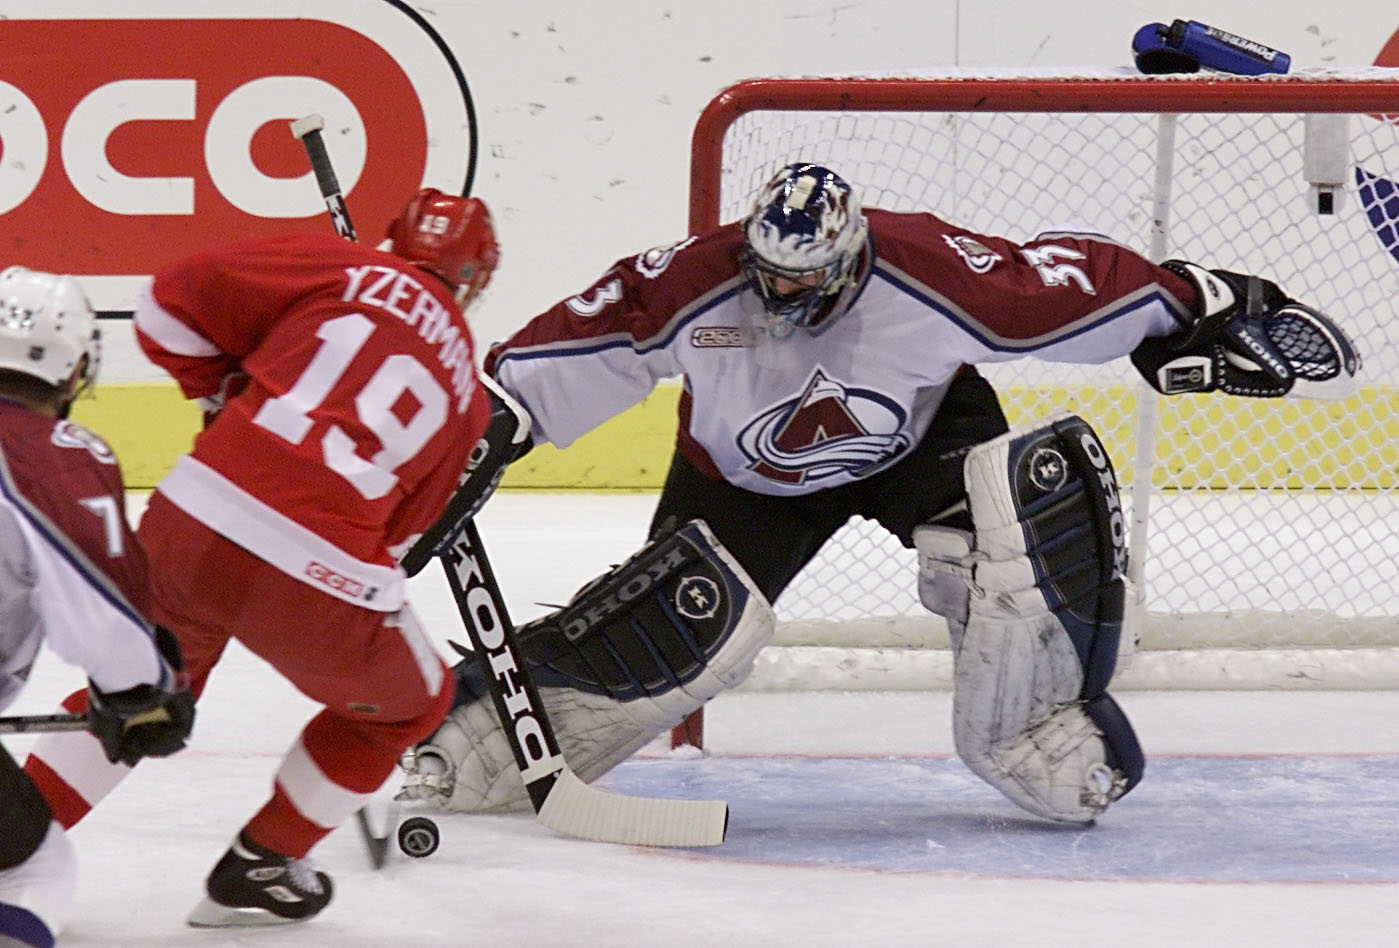 27 Apr 2000: Goalie Patrick Roy #33 of the Colorado Avalanche makes a save as Steve Yzerman #19 of the Detroit Red Wings drives the puck right to the goal in the first period during Game 1 of the Western Conference Semifinals at the Pepsi Center in Denver, Colorado. Mandatory Credit: Brian Bahr/ALLSPORT